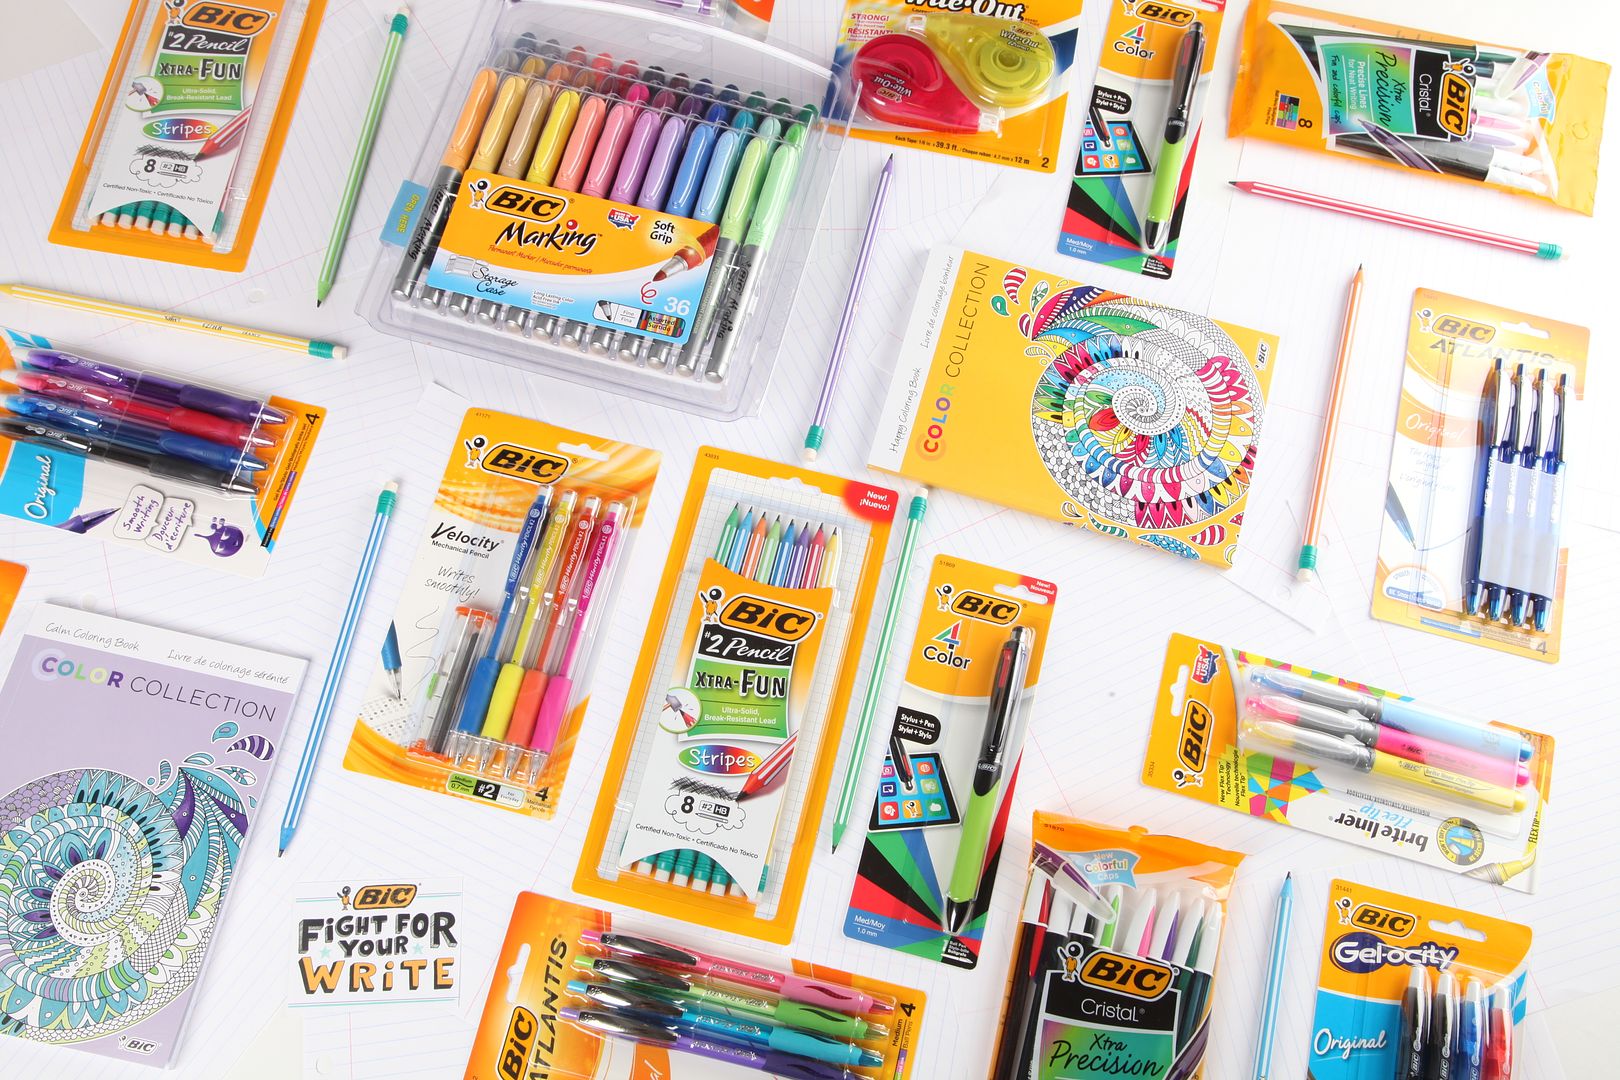 BIC: celebrating handwriting with the Fight for your Write Campaign | Sponsor of the Cool Mom Picks back to school guide 2016